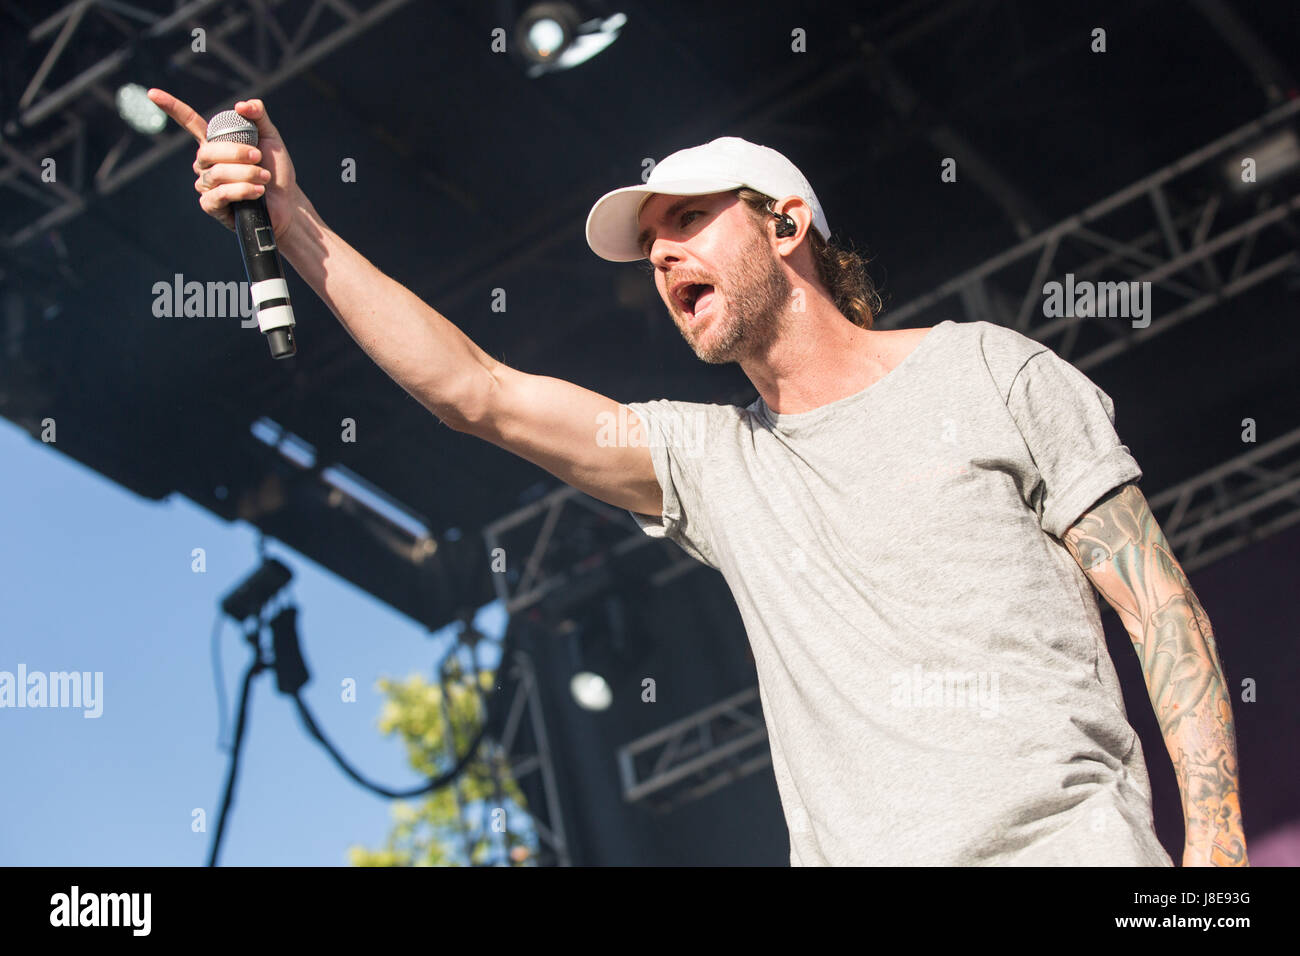 A Conversation with Jared “DIRTY J” Watson of Dirty Heads